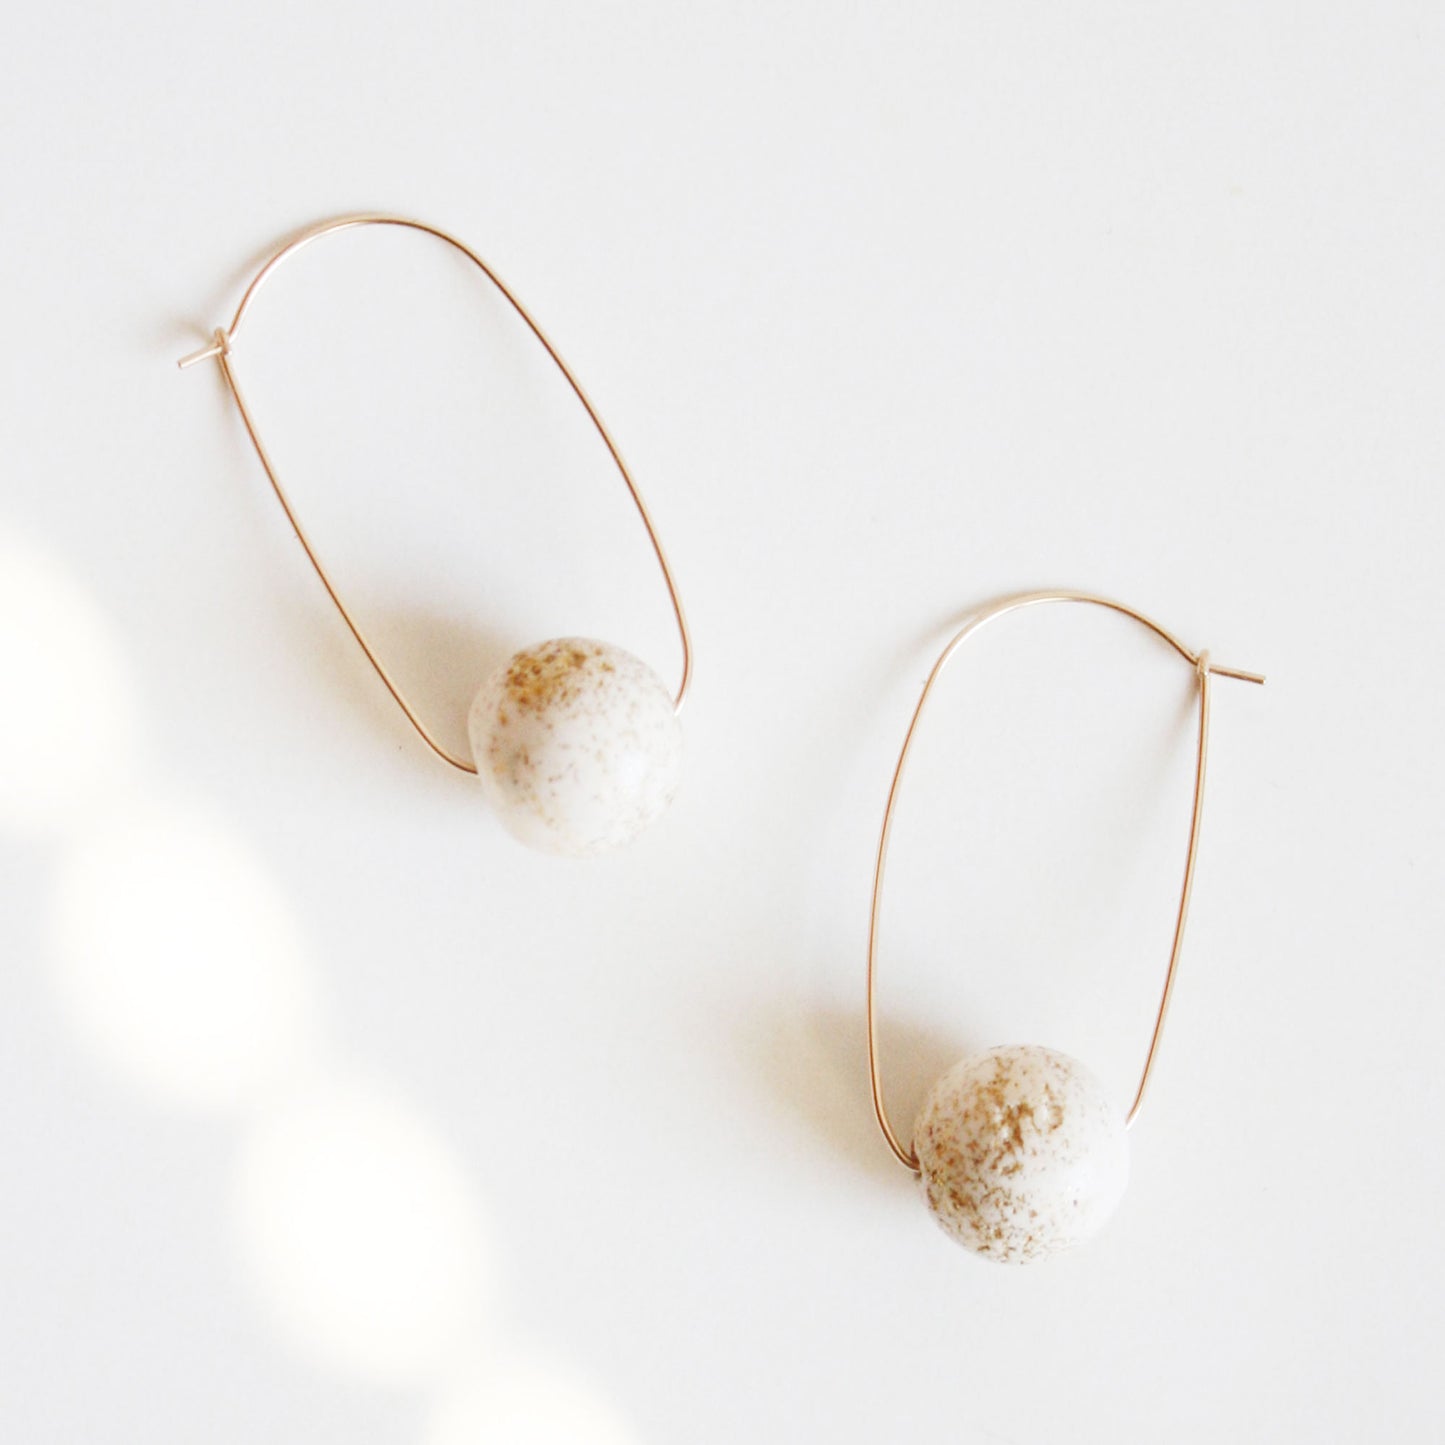 Oval Hoop Earrings with Large White Balls